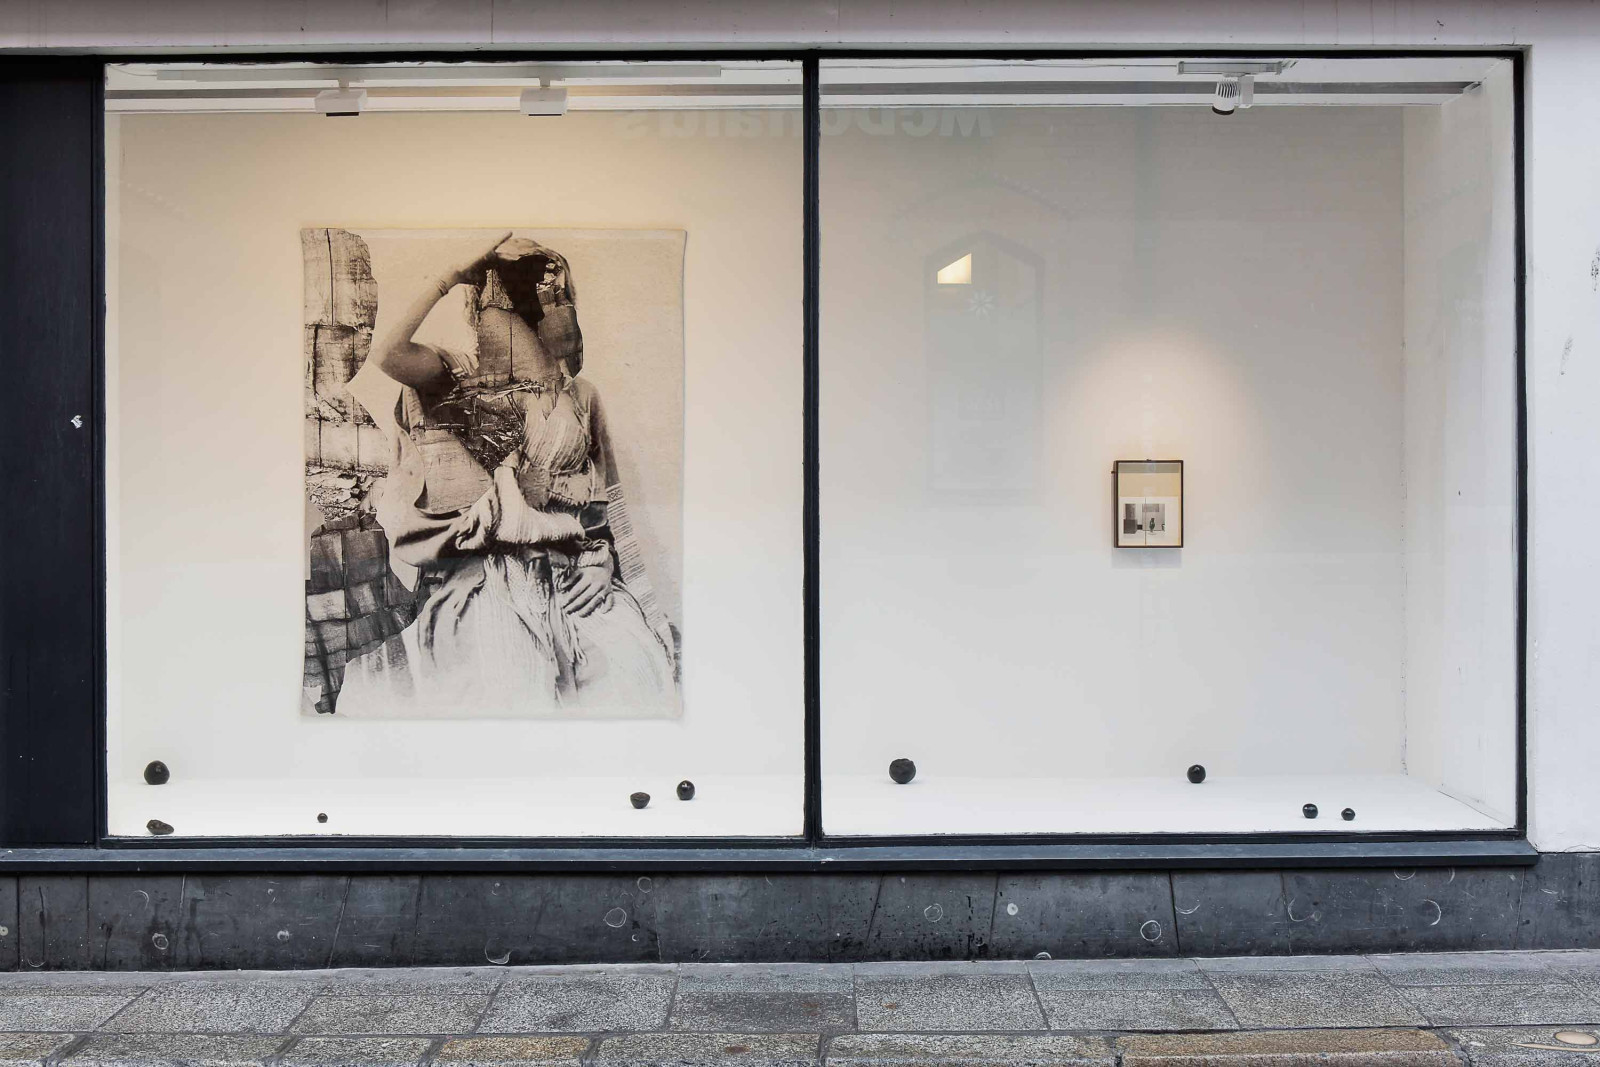 Temple Bar Gallery, 2019. Curated by Clíodhna Shaffrey & Michael Hill. Temple Bar Gallery, 2019. Curated by Clíodhna Shaffrey & Michael Hill. Photo: Kasia Kaminska.